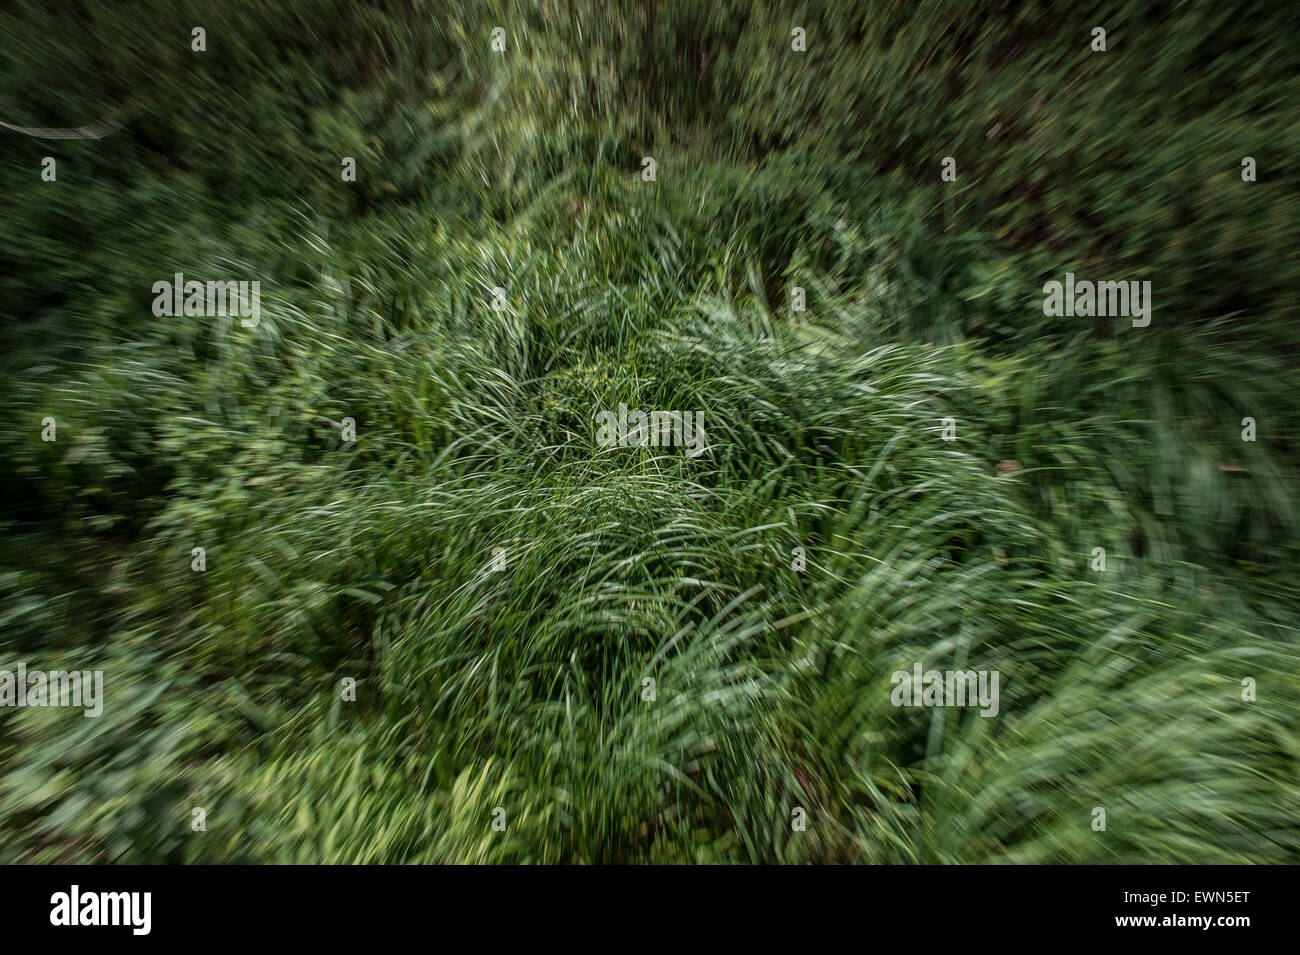 Long grass in motion Stock Photo